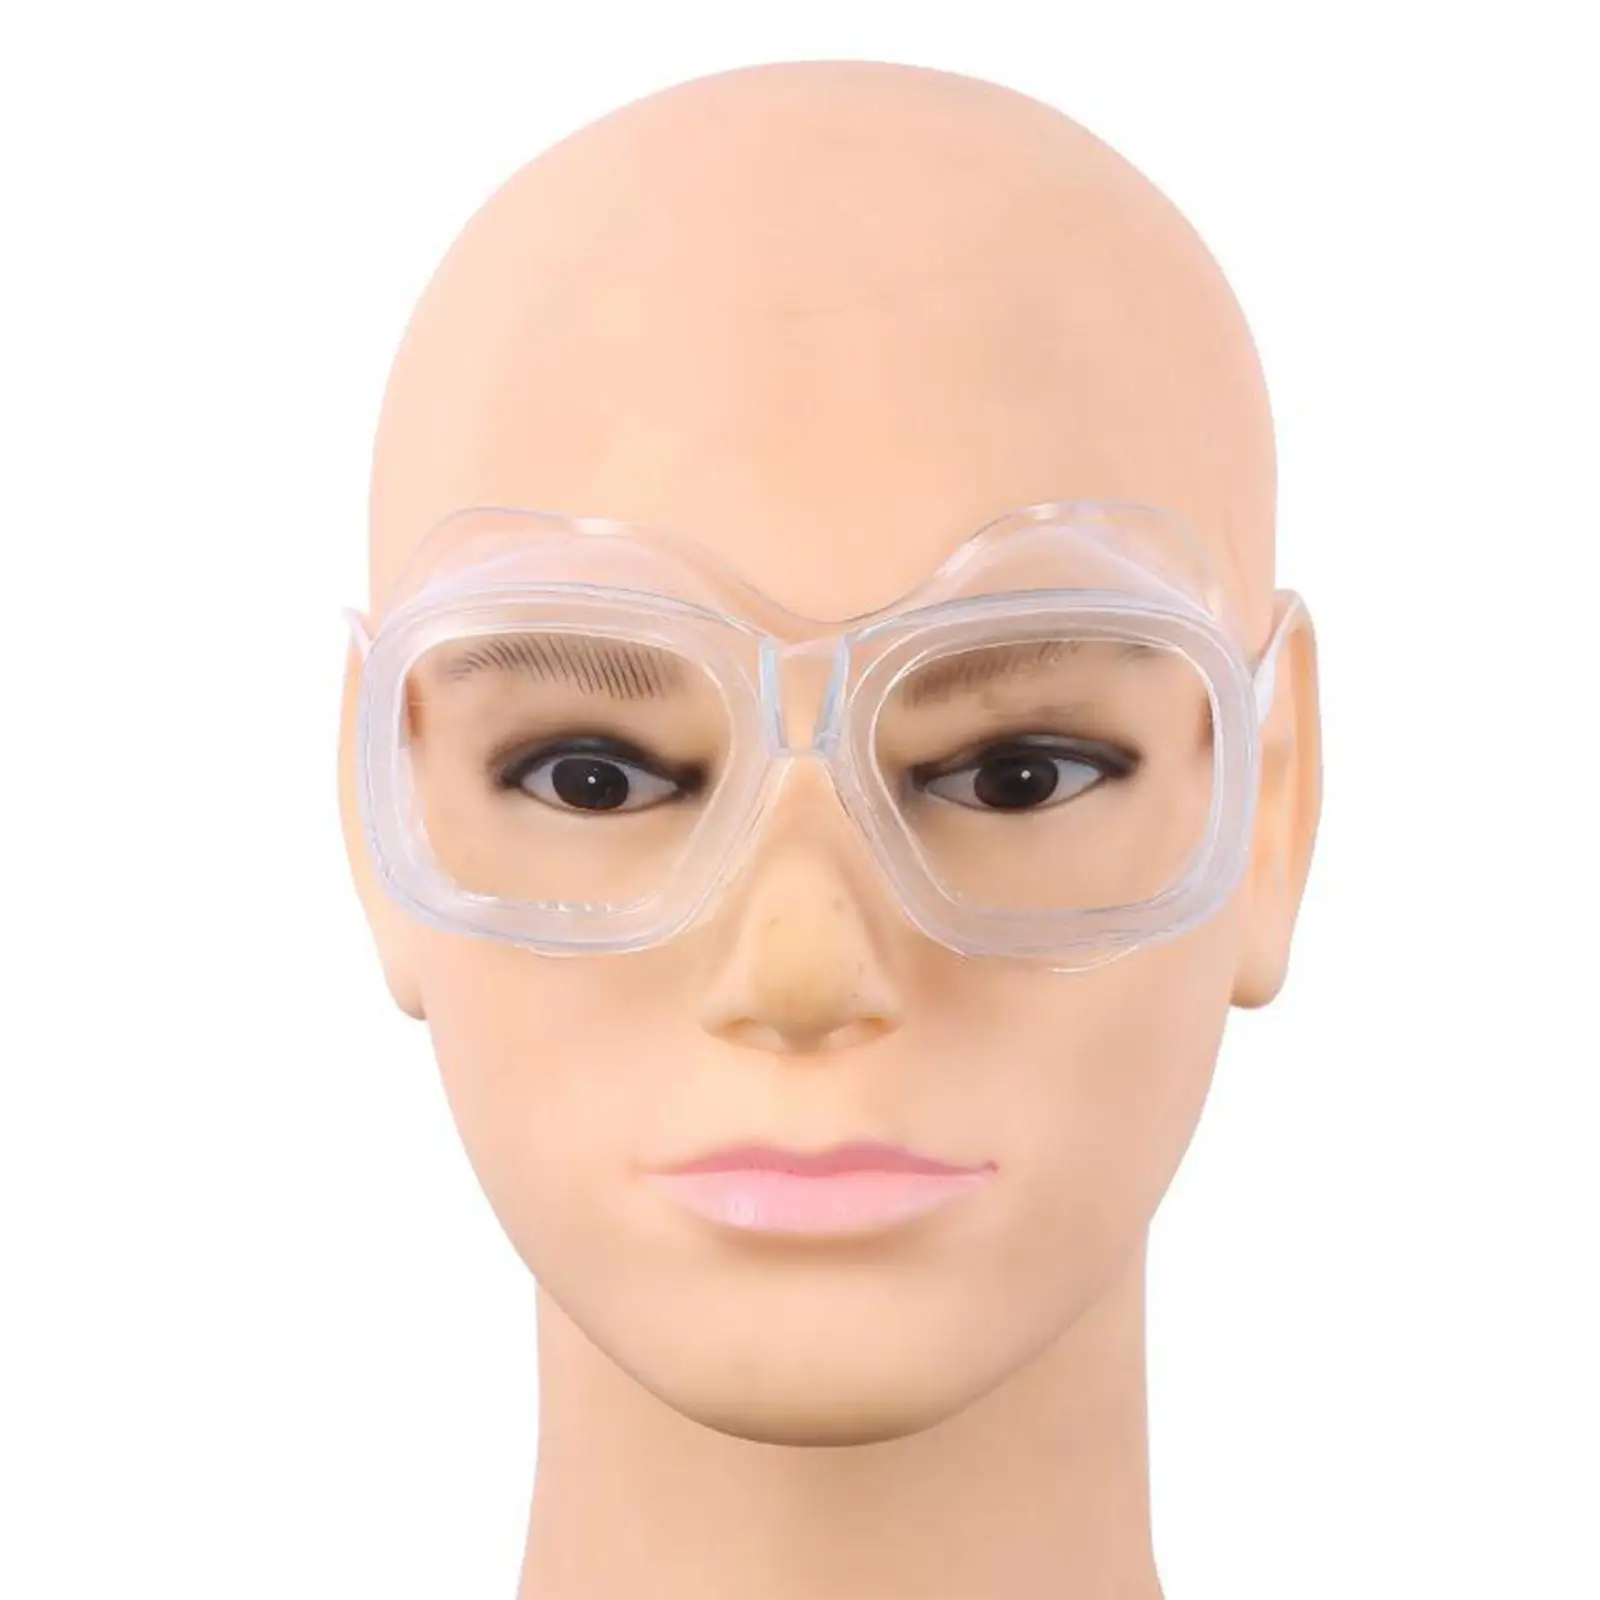 Protective Safety Glasses Clear Anti-Fog High Impact Resistance Perfect Eye Protection for Lab, Chemical, and Workplace Safety